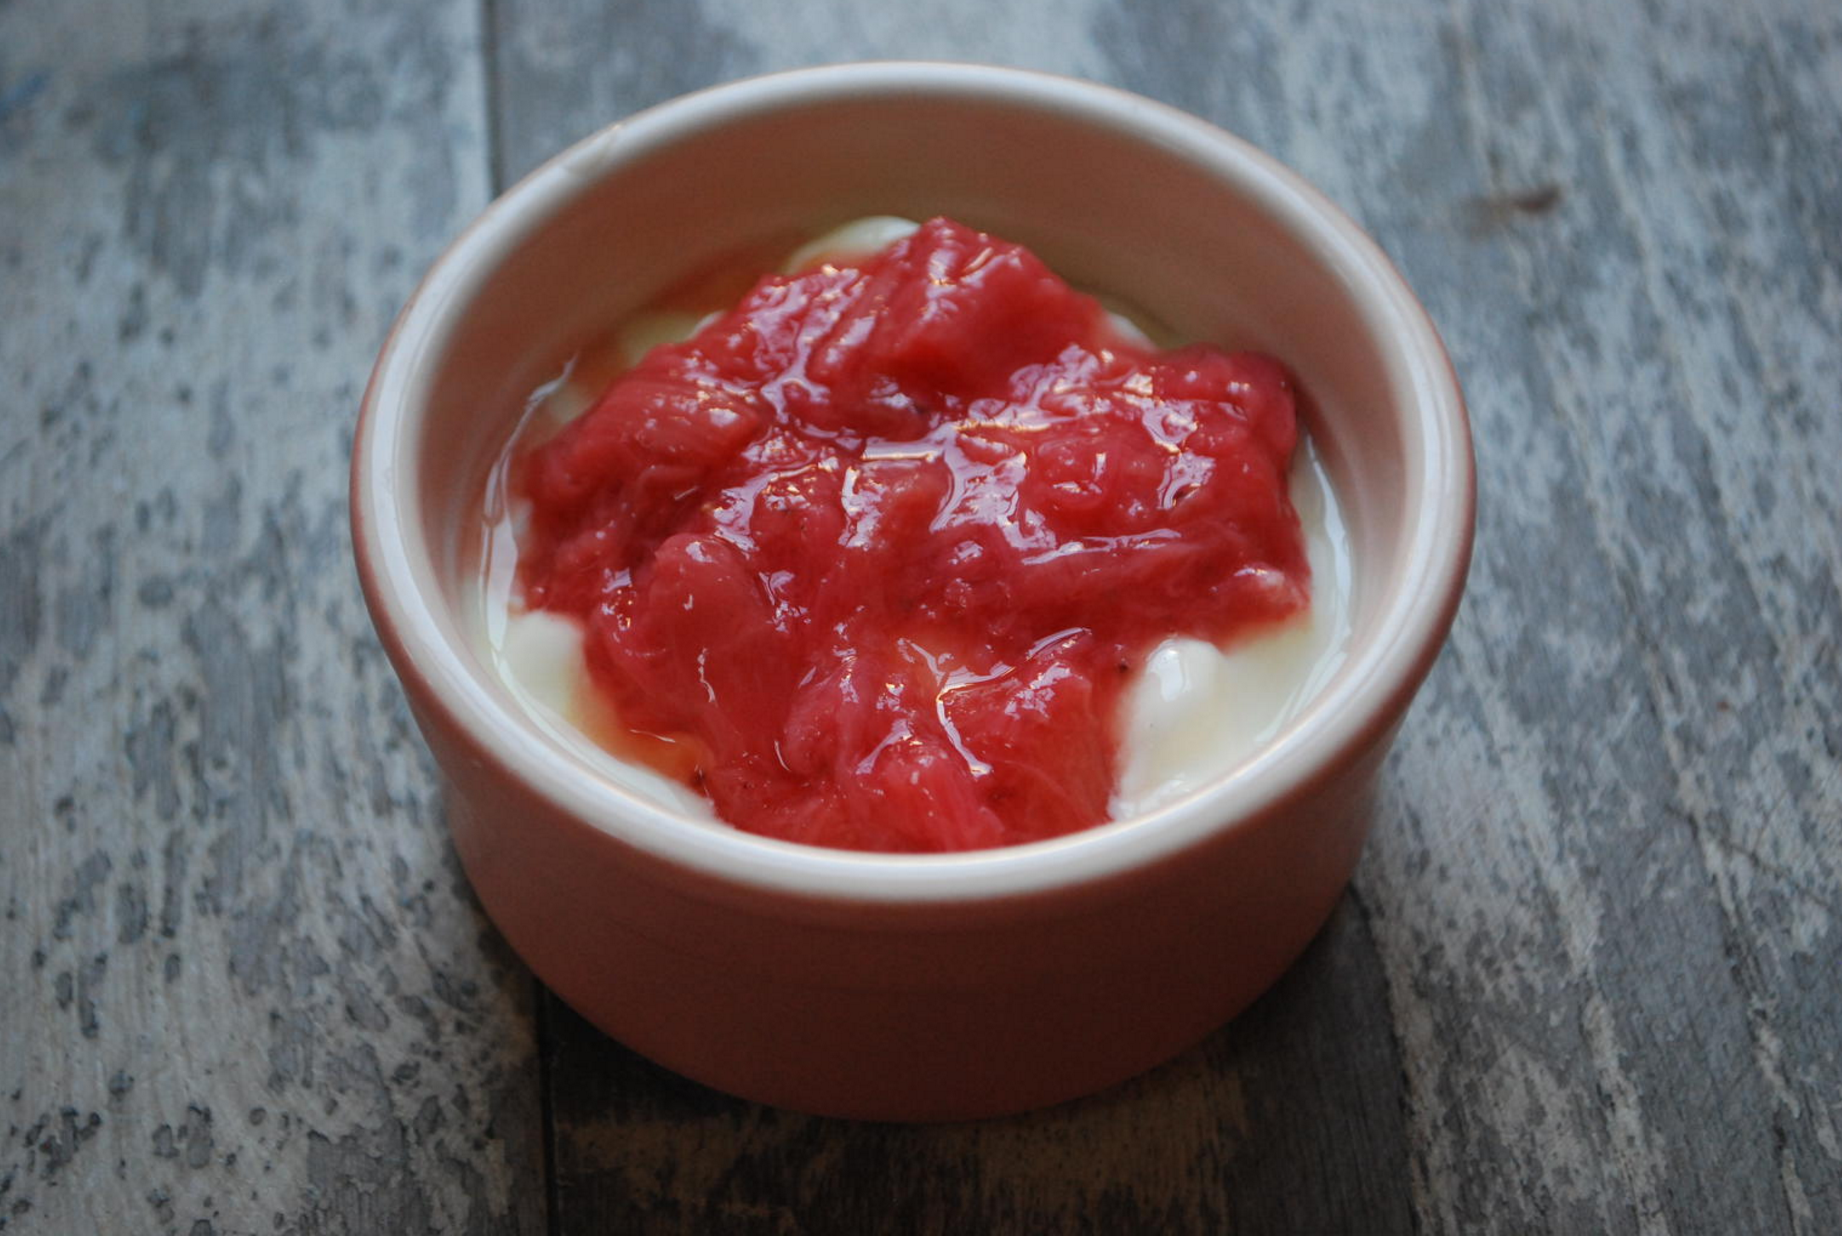 Rhubarb and Strawberry Compote